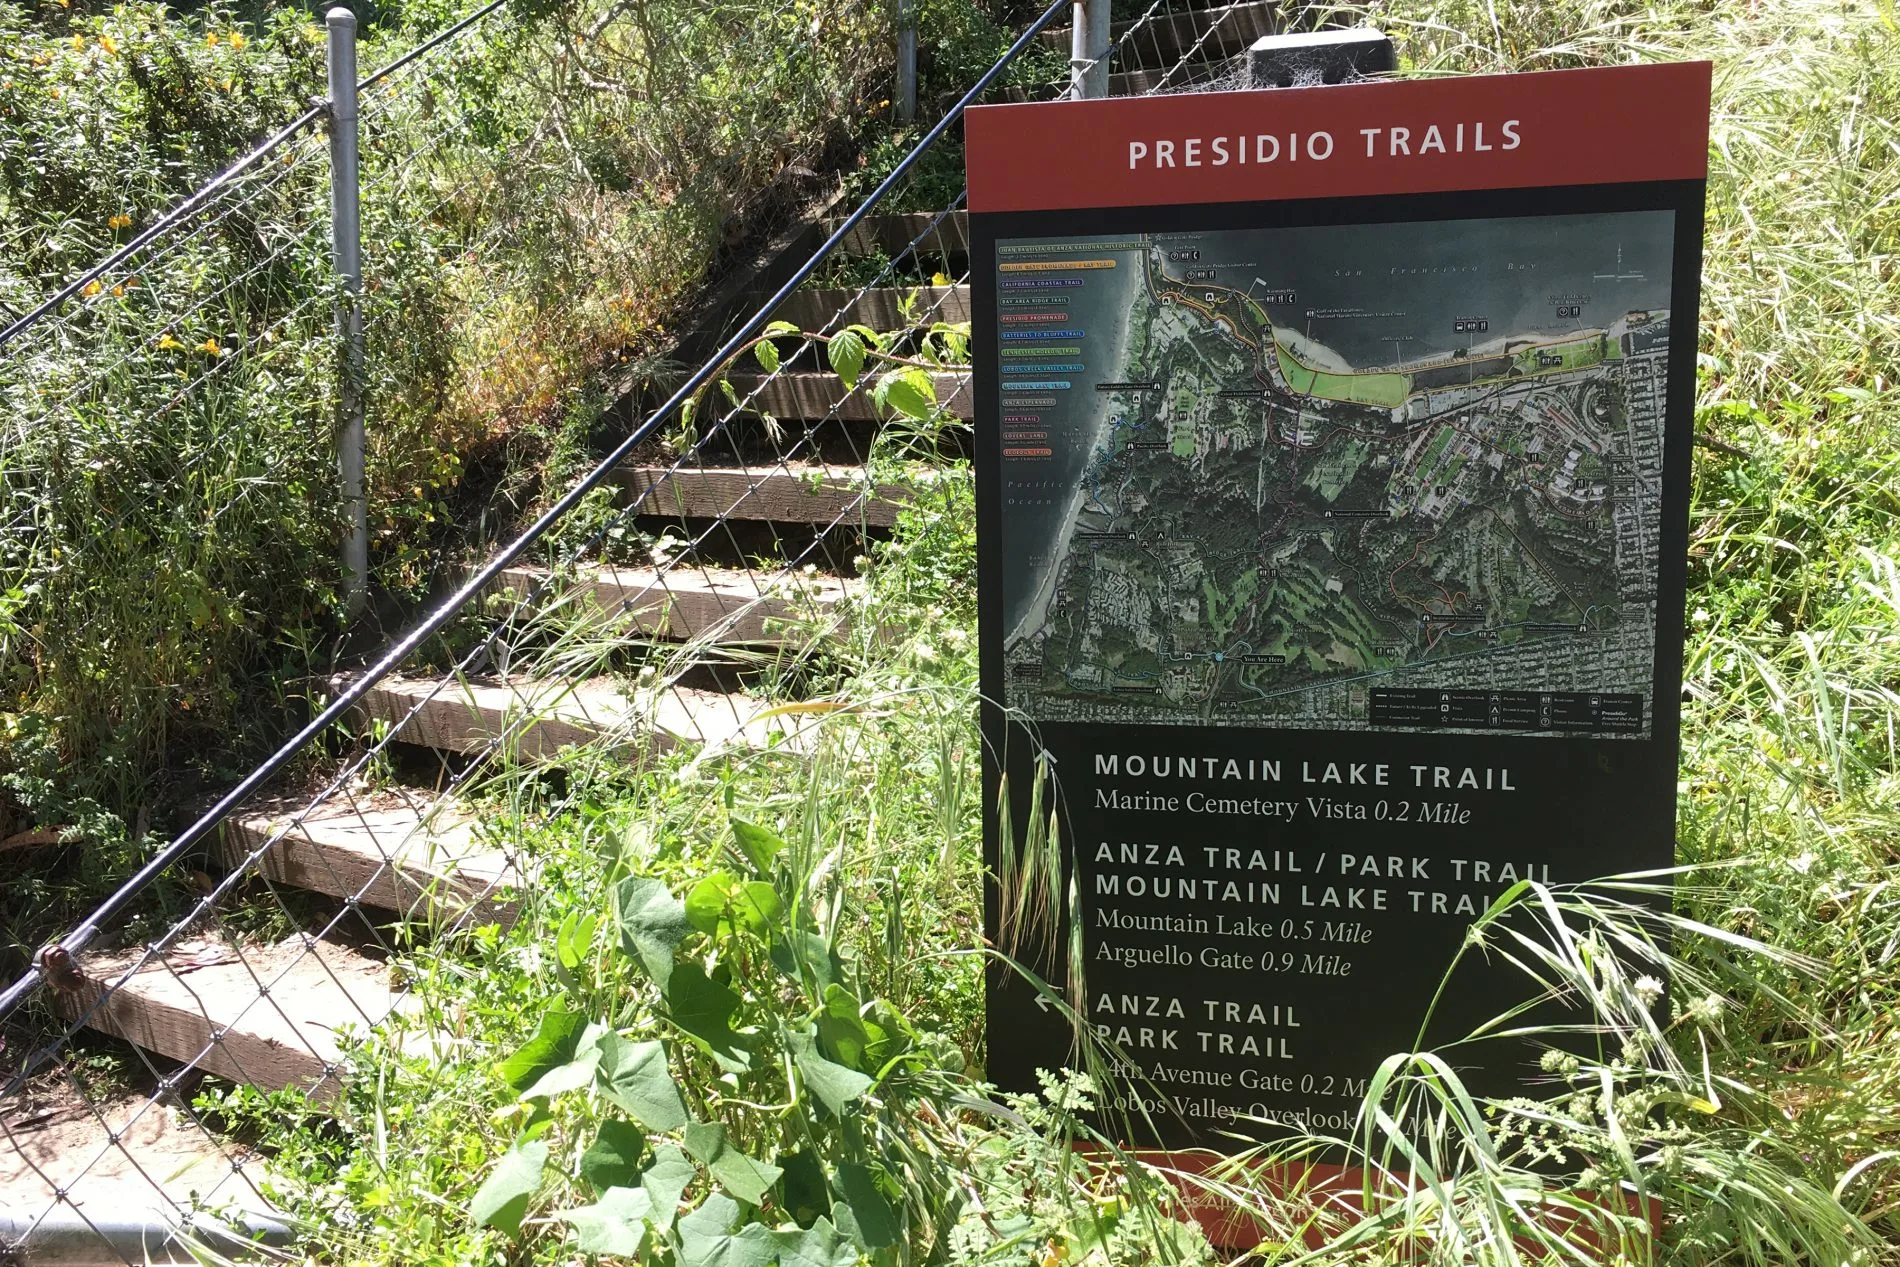 Presidio trail sign by the stairs up to the dune habitat boardwalk on Mountain Lake Trail.